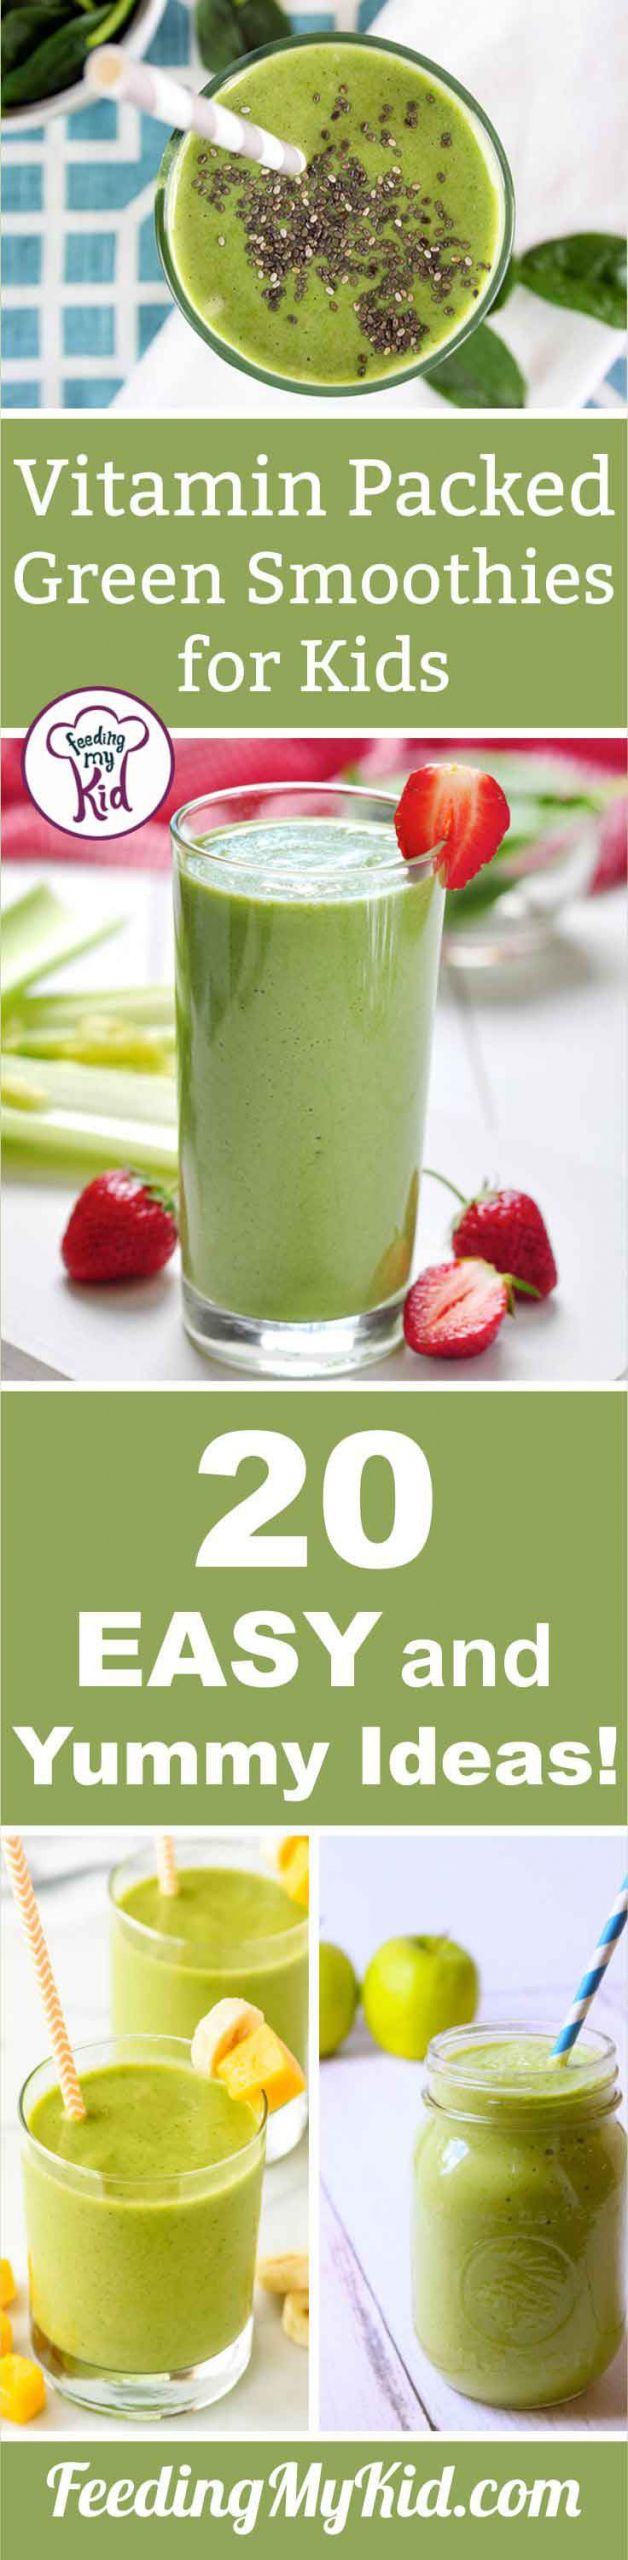 Green Smoothies For Kids
 Green Smoothies for Kids A Yummy Vitamin Packed Drink